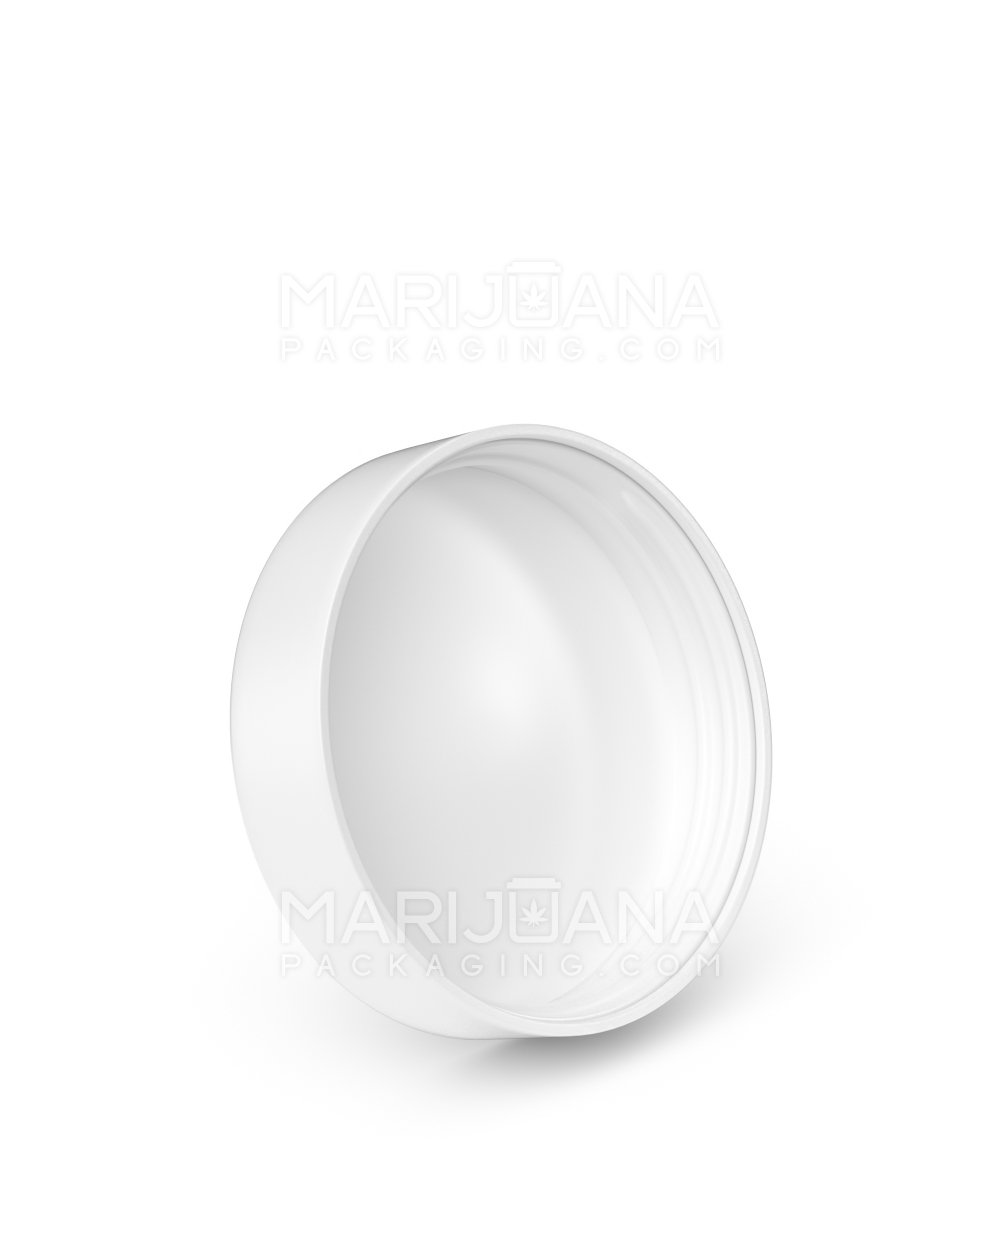 Child Resistant | Smooth Push Down & Turn Plastic Caps w/ Foam Liner | 57mm - Semi Gloss White - 72 Count - 2